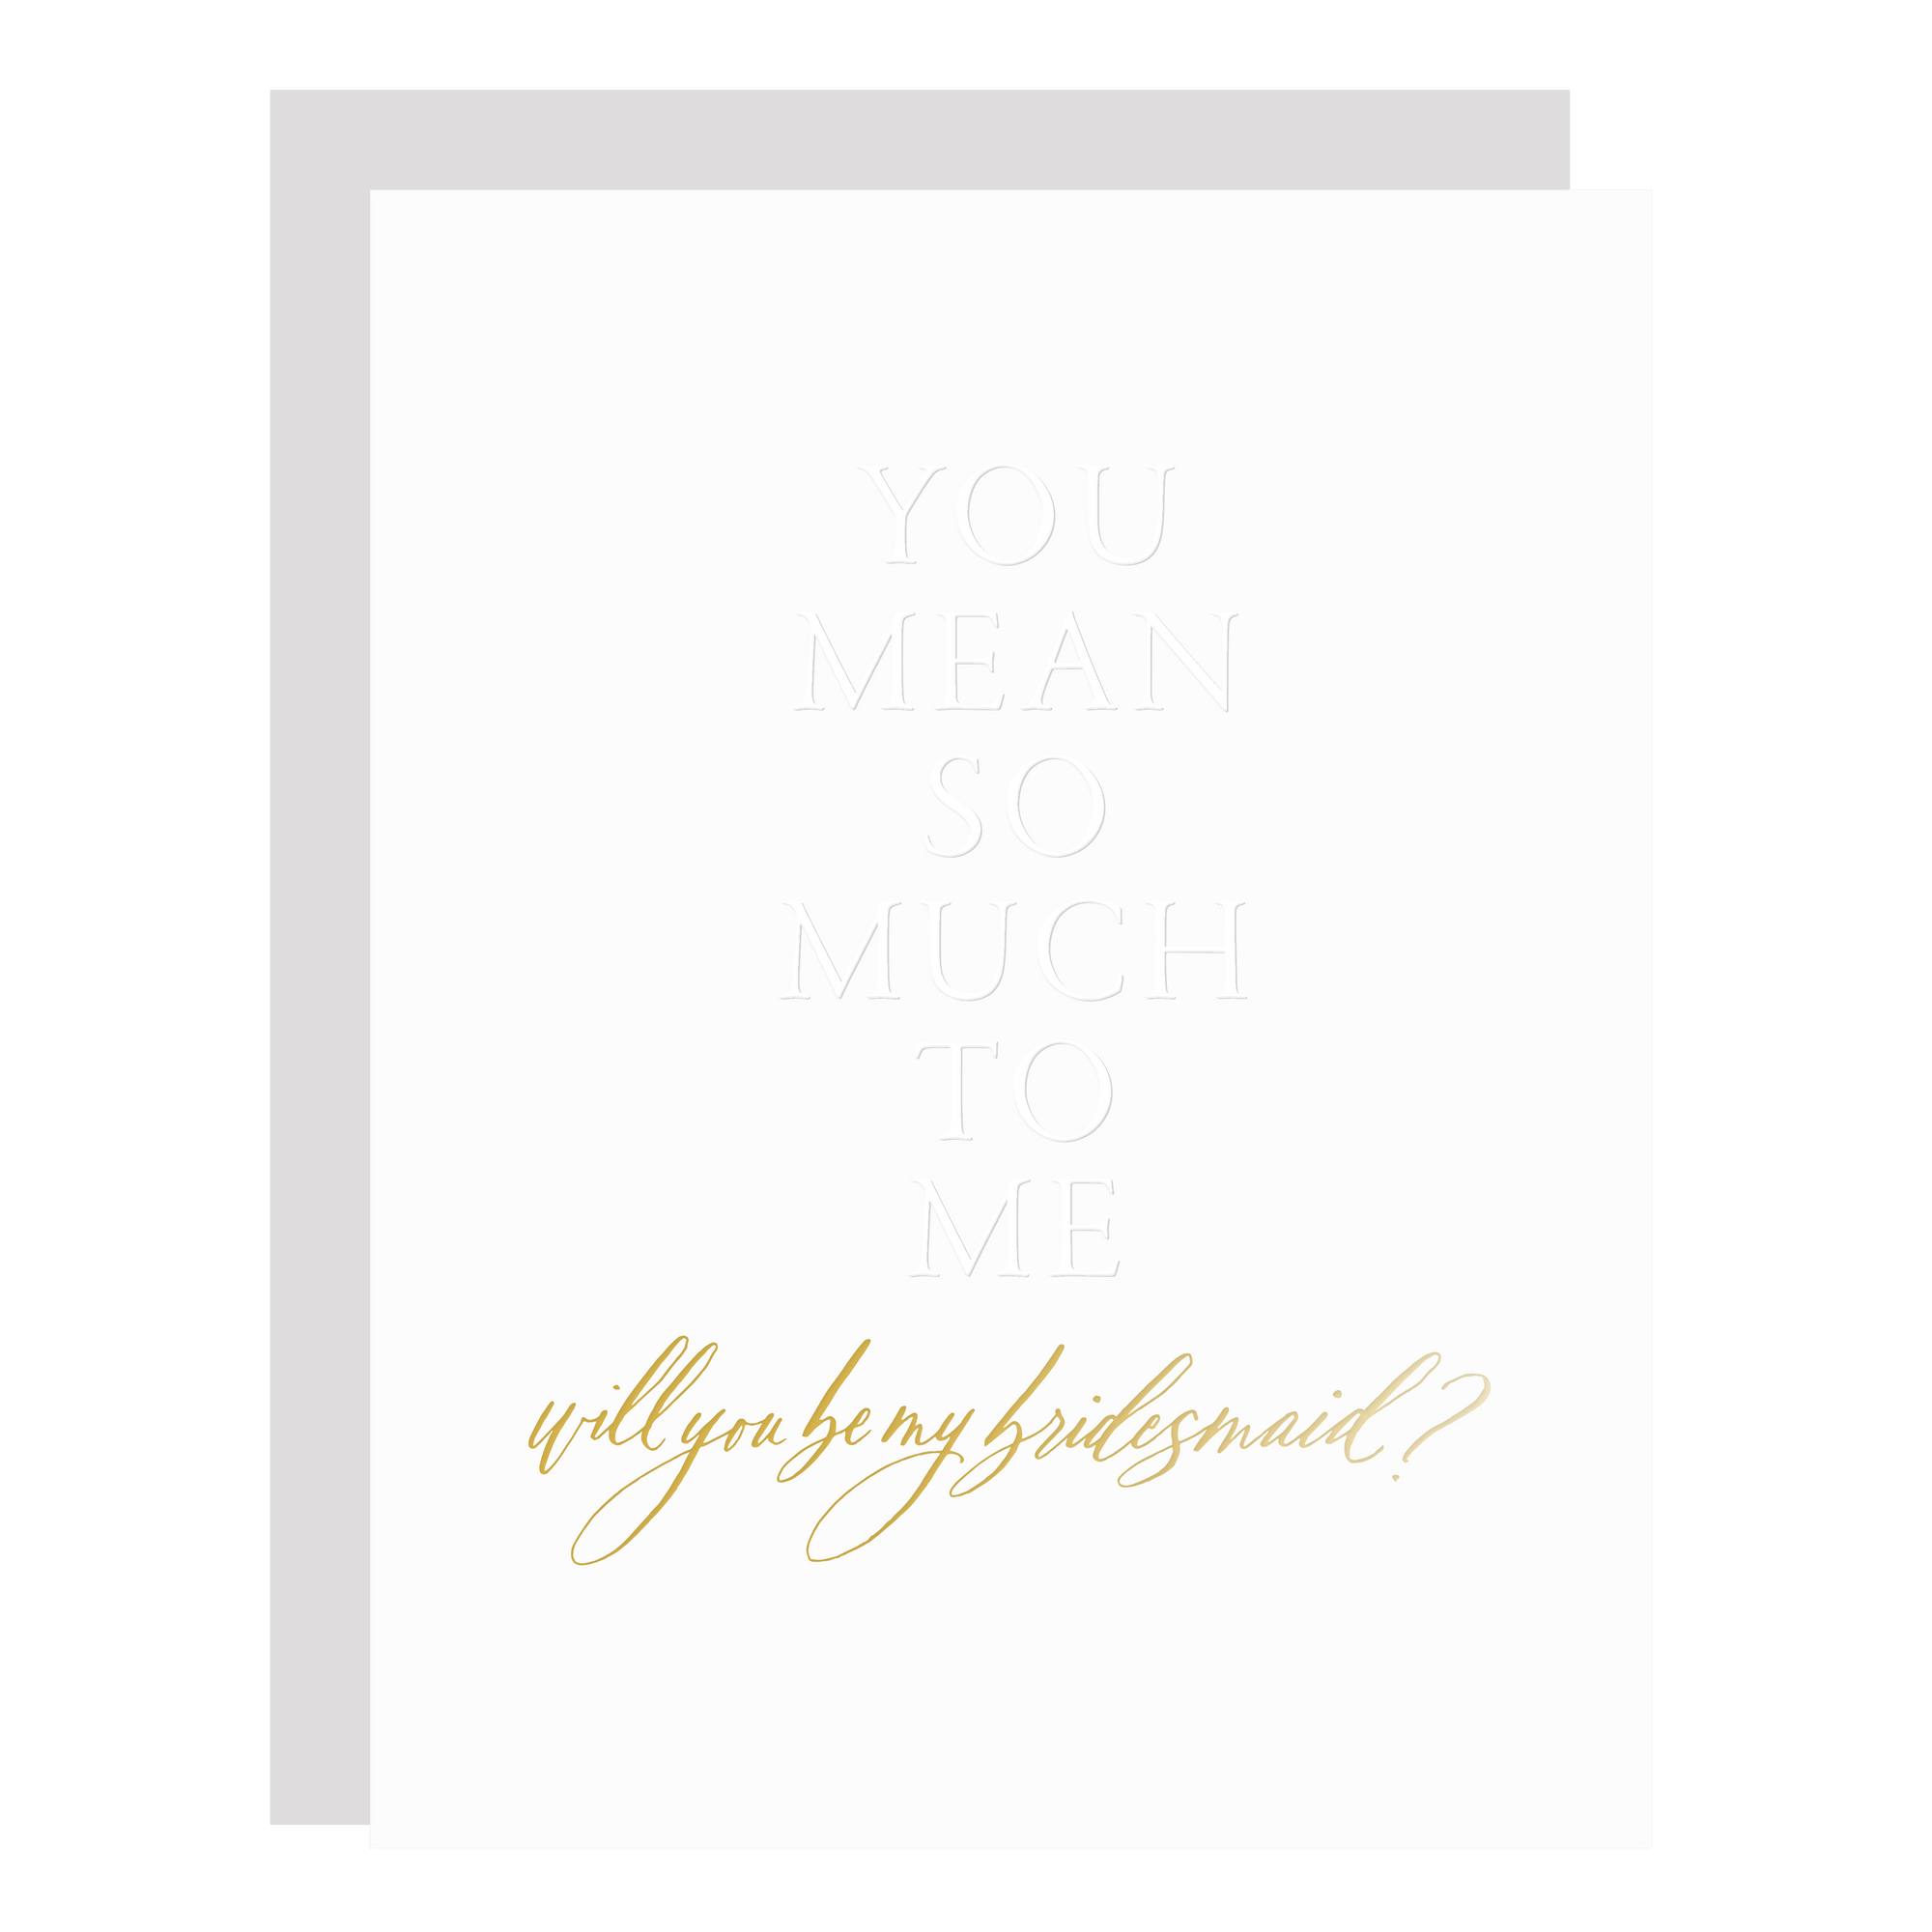 "Mean So Much To Me Embossed Bridesmaid" card blind embossed and gold foil stamped by hand. 